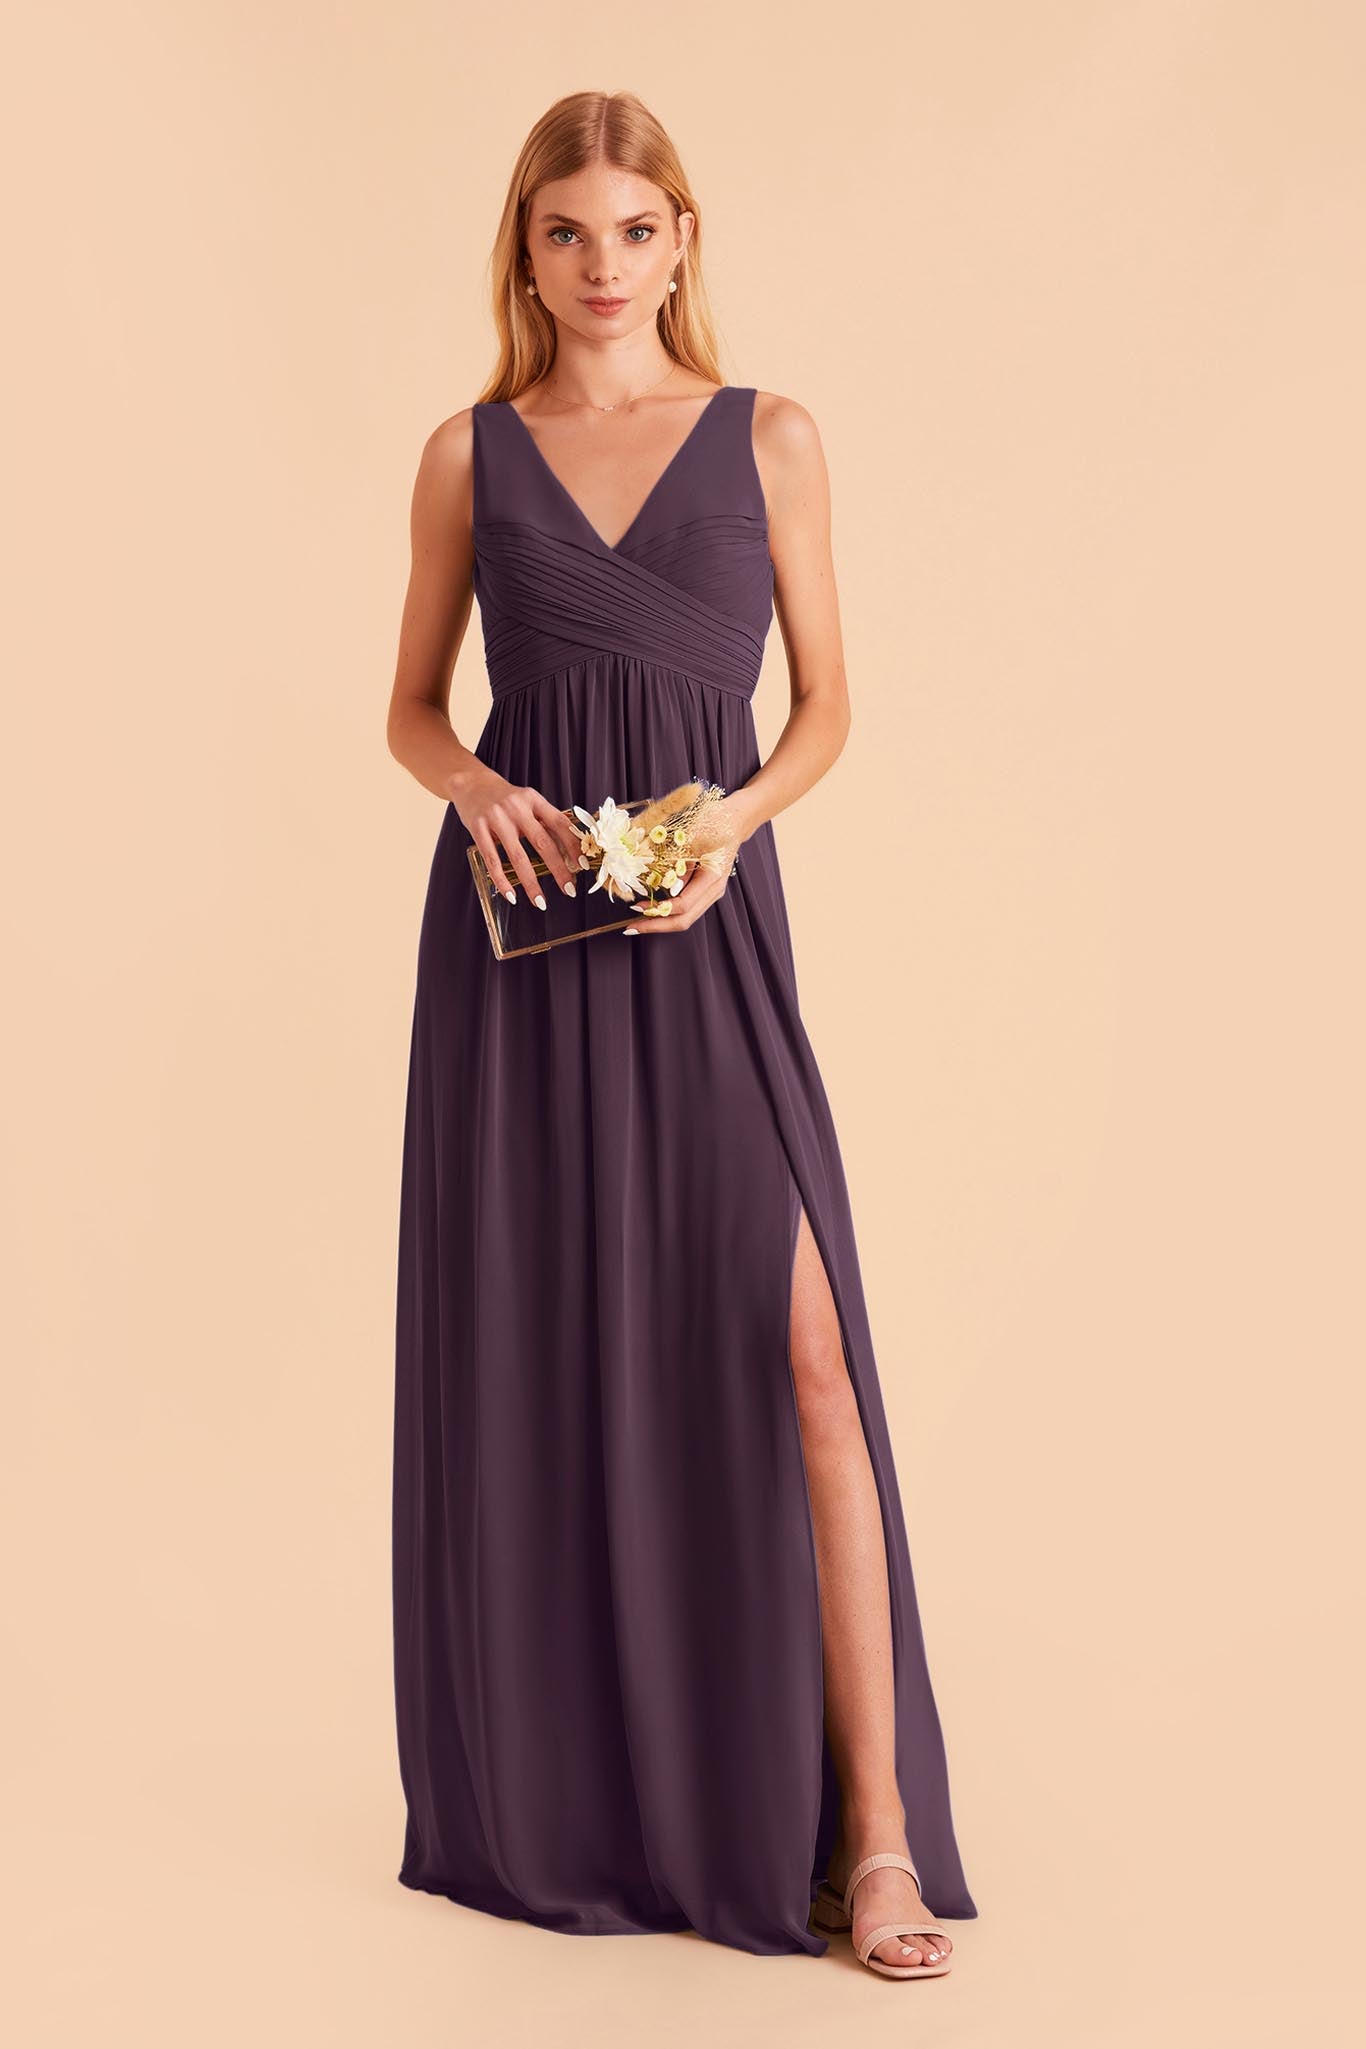 Plum Laurie Empire Dress by Birdy Grey